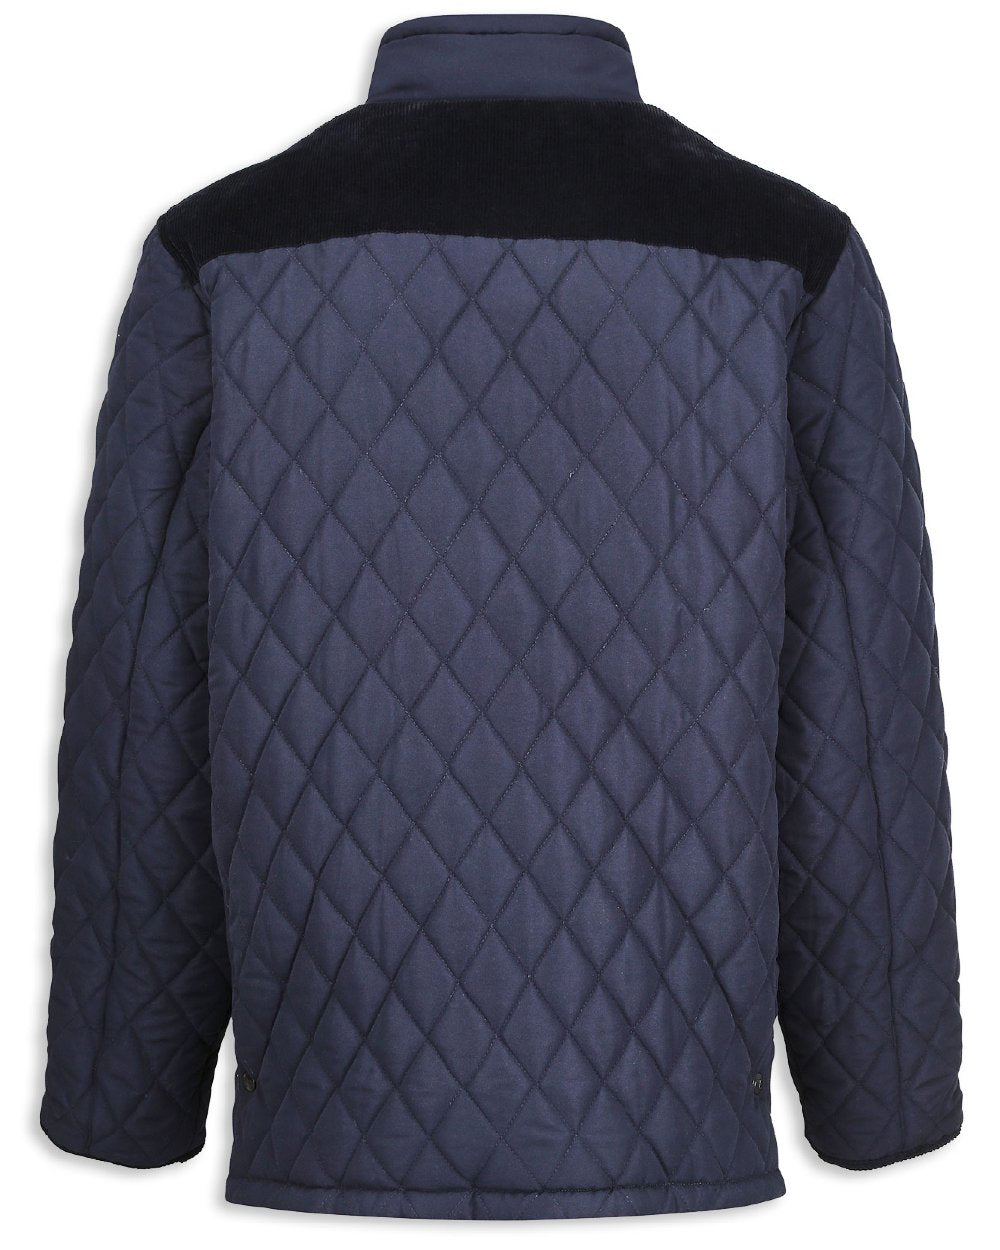 Champion Lewis Diamond Quilted Jacket in Navy 